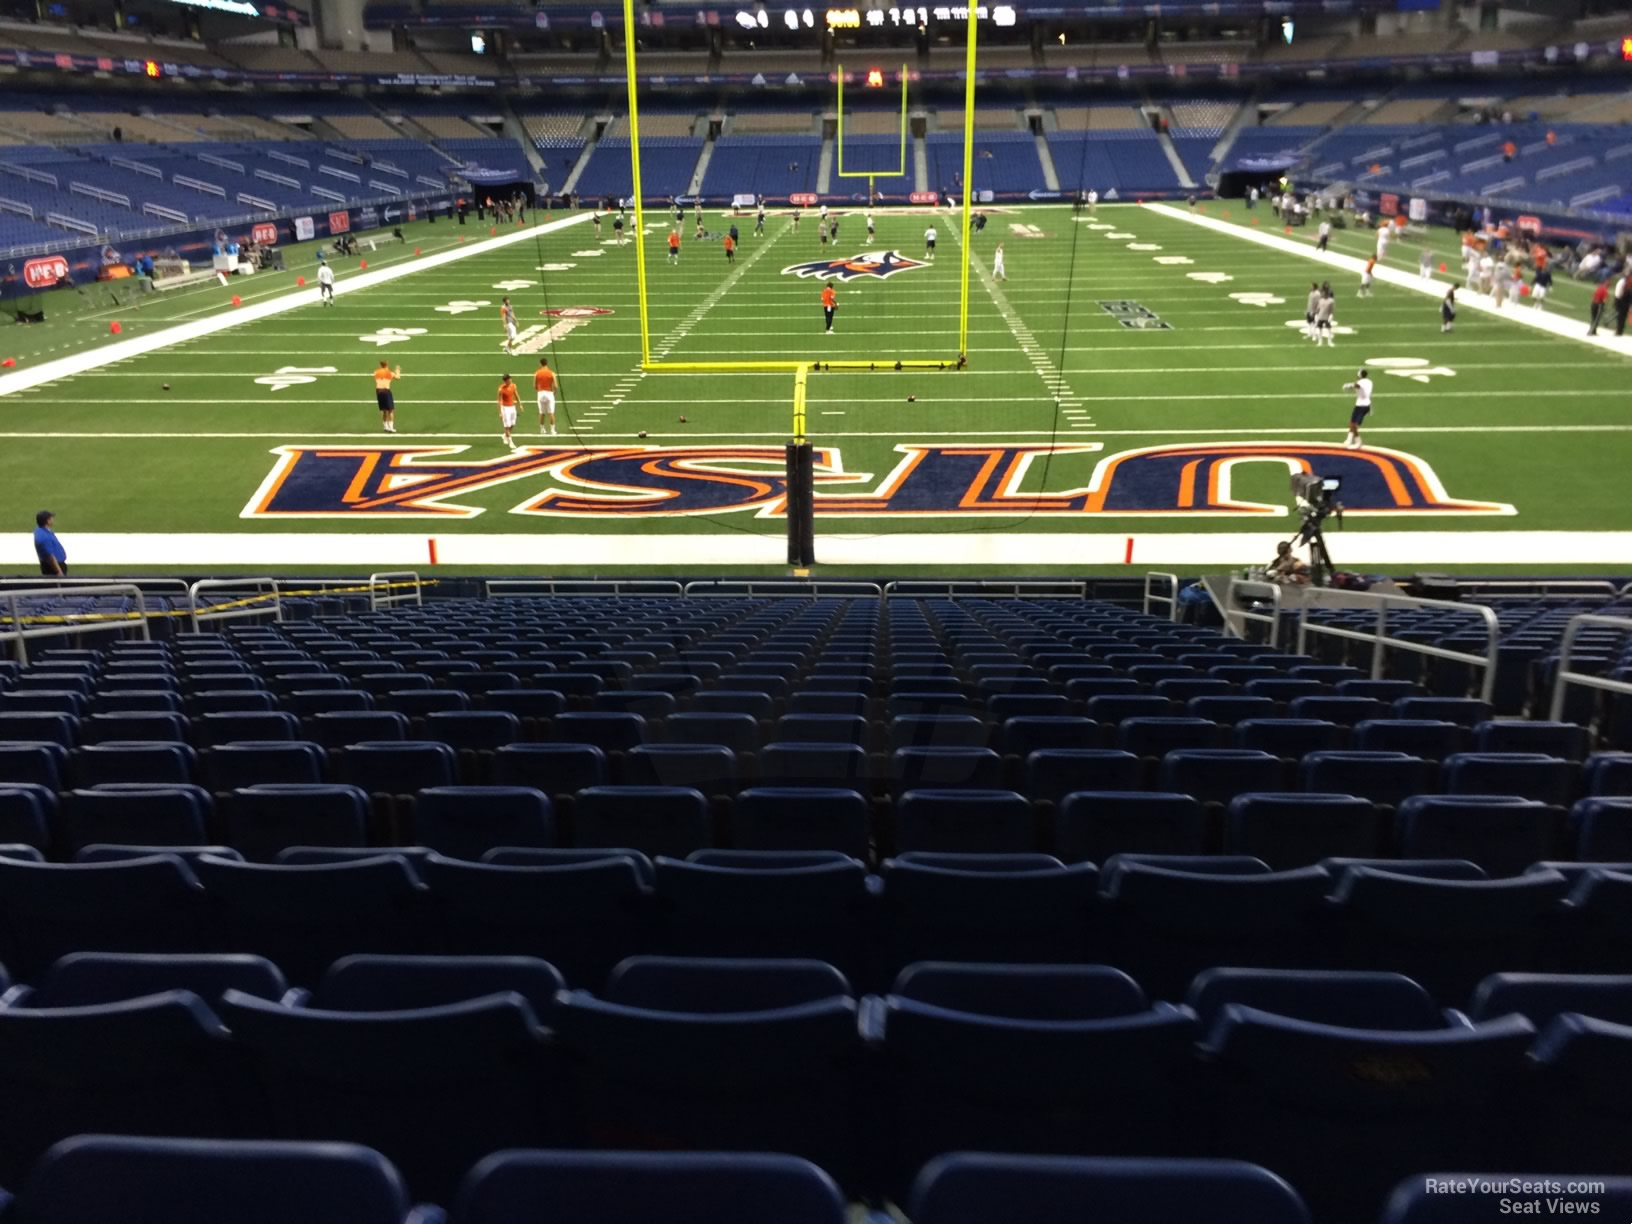 section 123, row 18 seat view  for football - alamodome